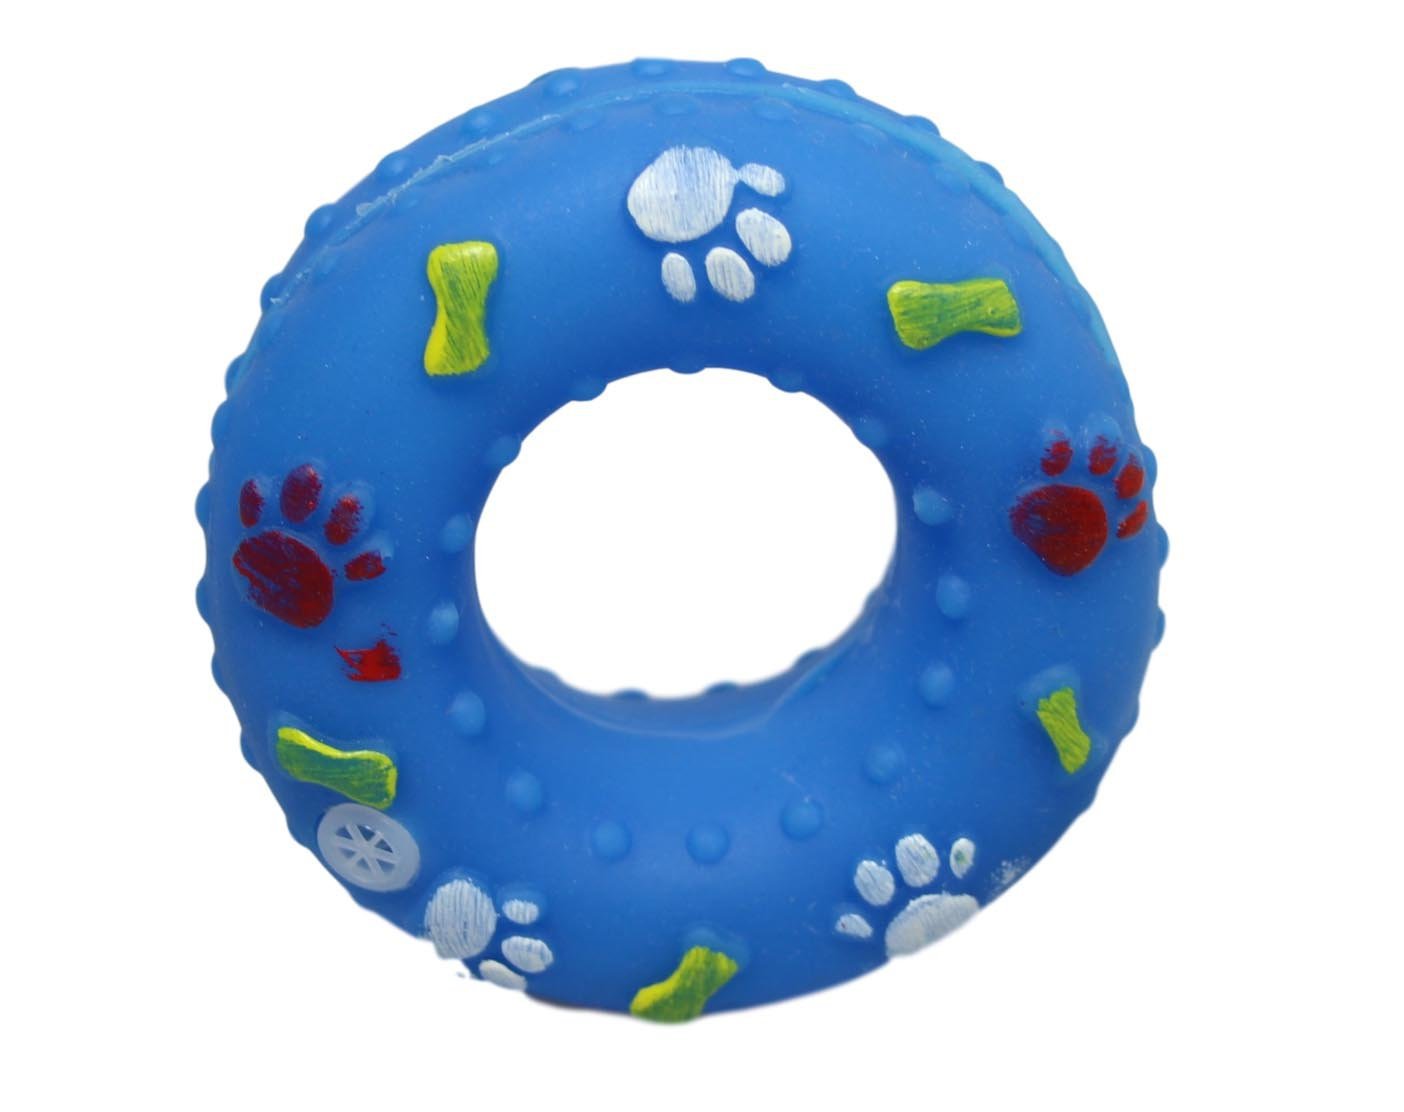 Pet Dog Toy Squeaky Donut Ring 8 x 3.5 cm Assorted Designs and Colours 5366 (Parcel Rate)